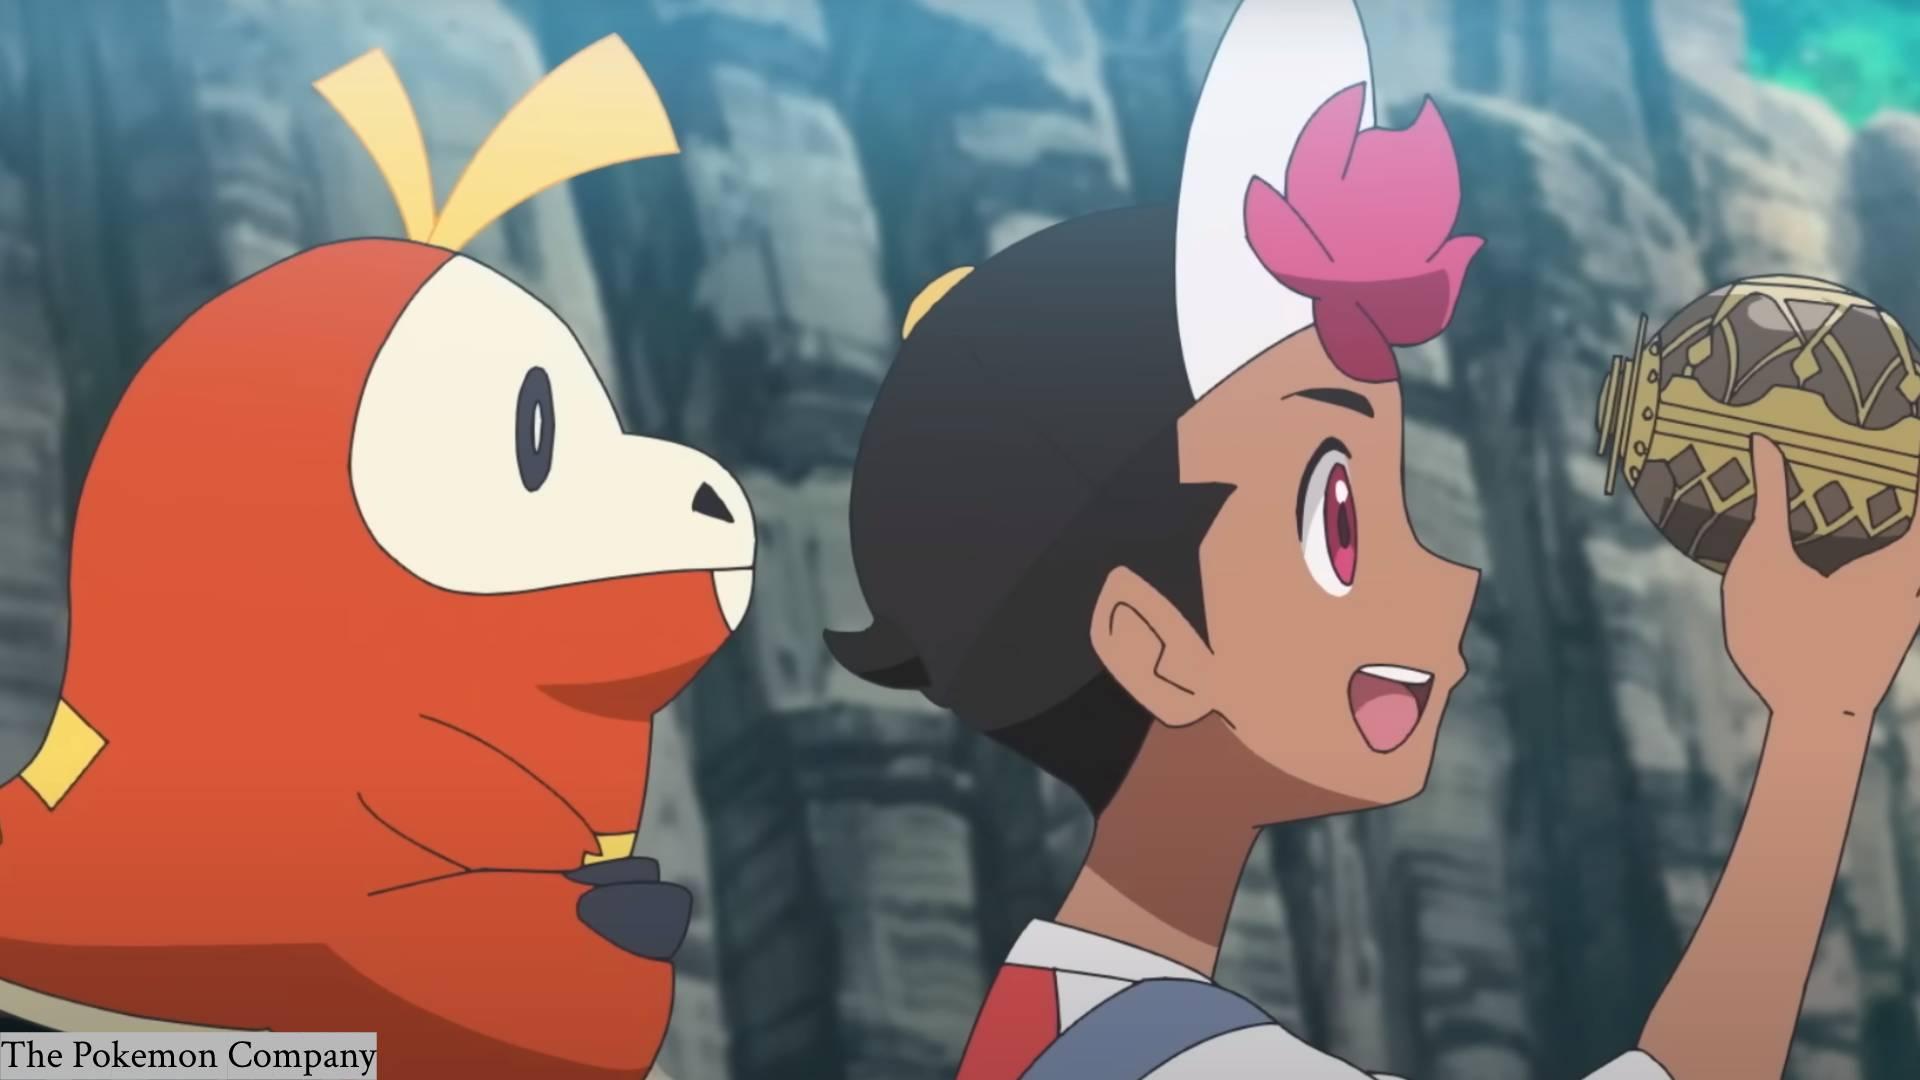 Who are the new Pokémon characters?